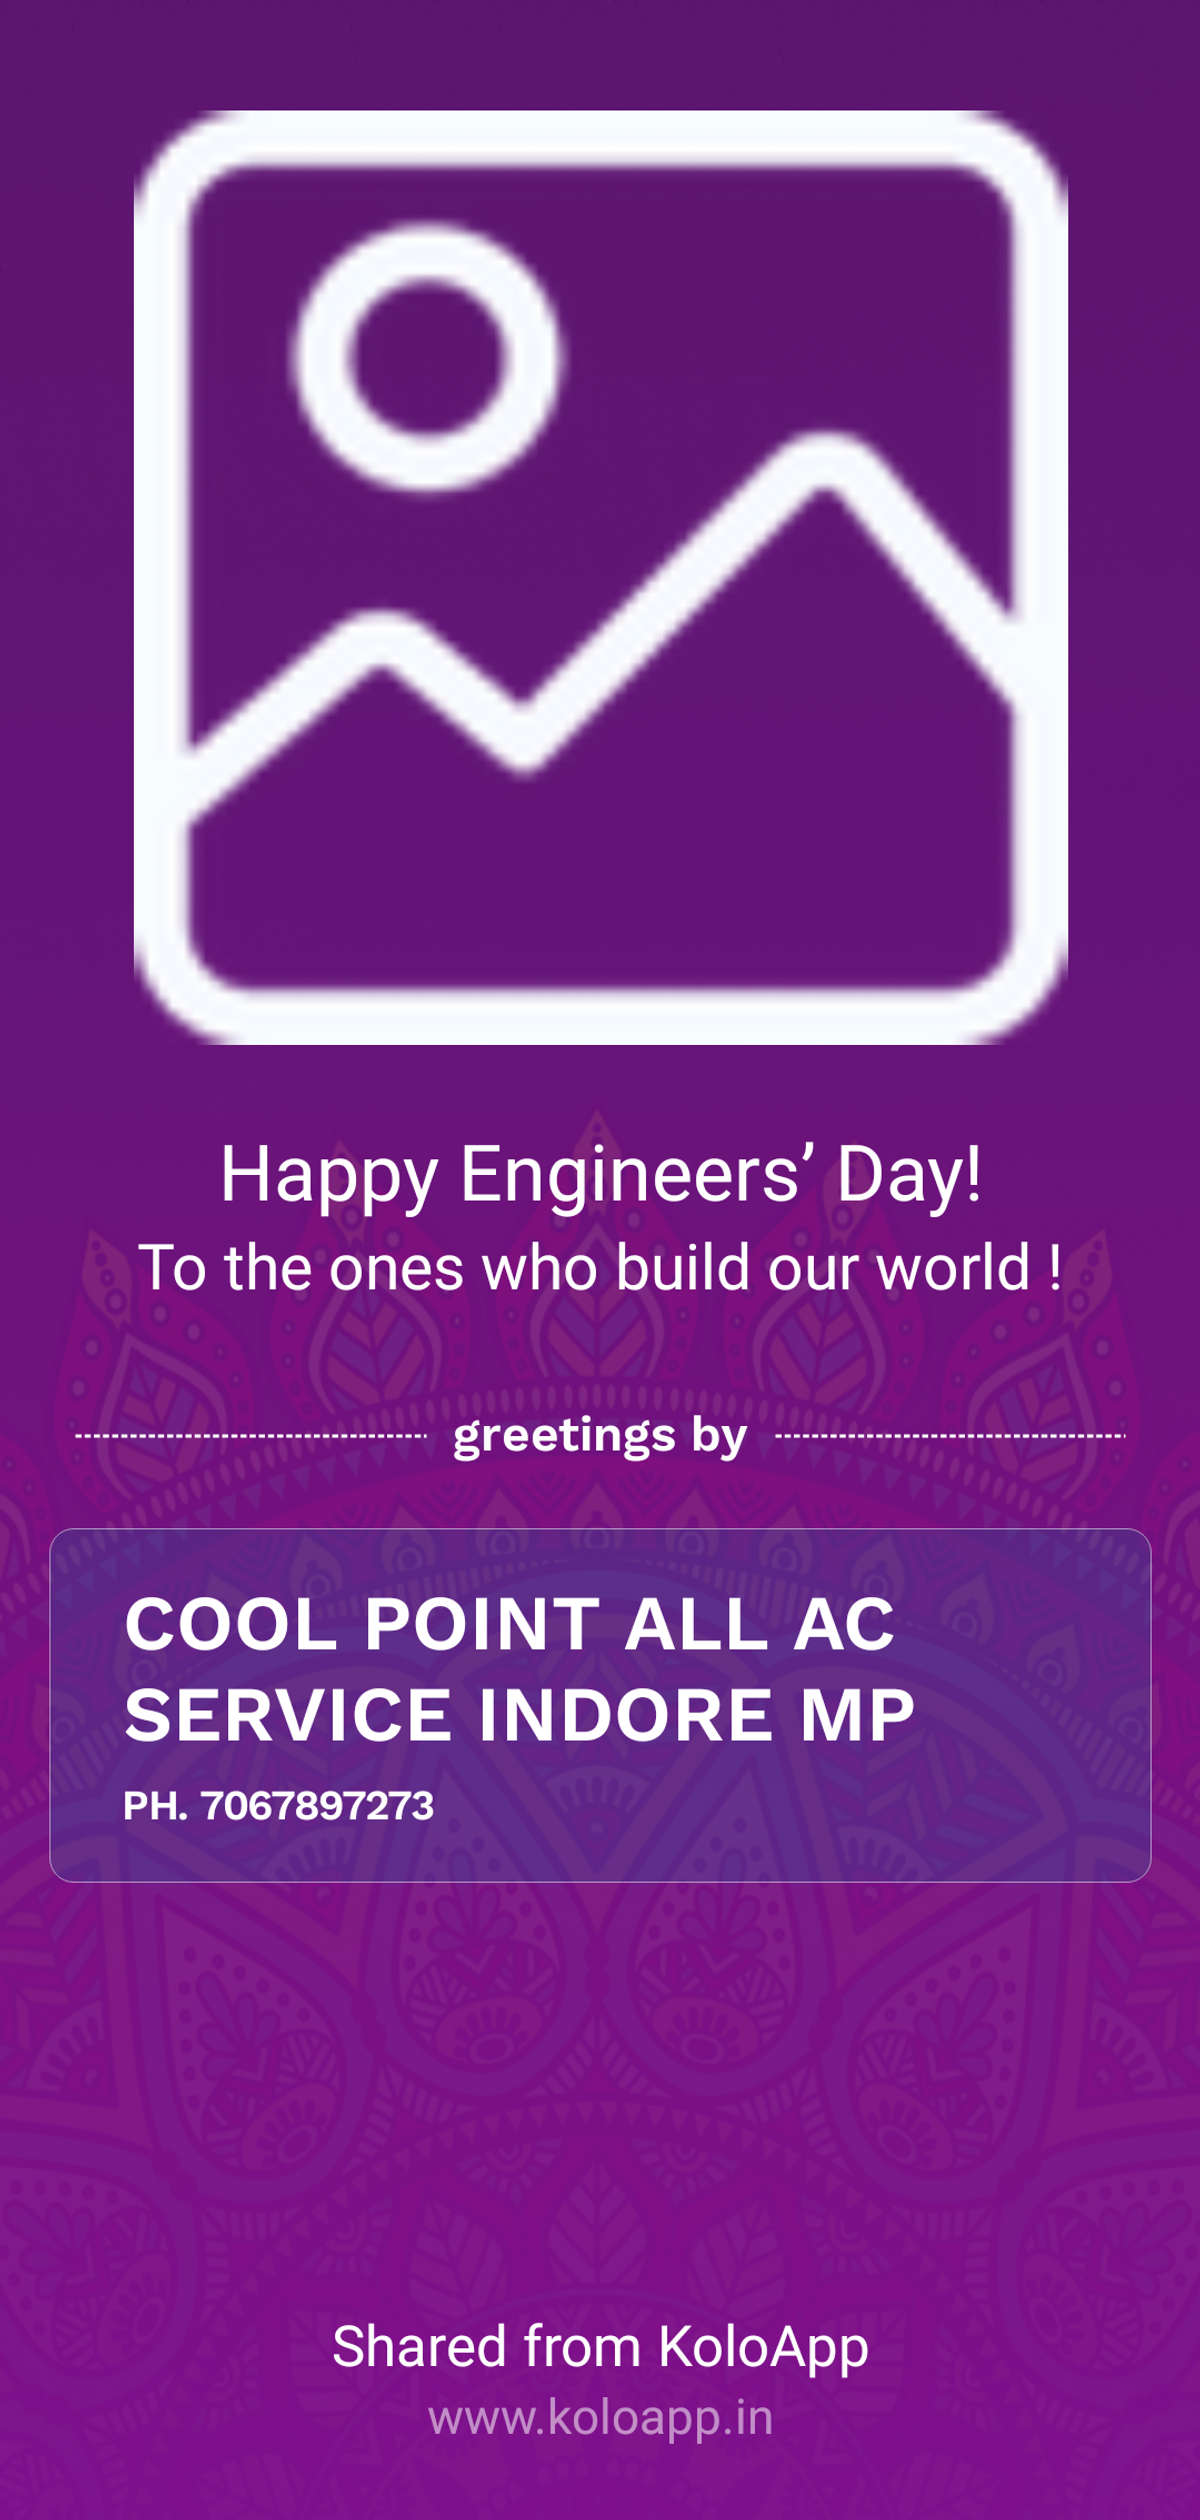 Designs by HVAC Work cool point all AC service indore MP, Indore | Kolo